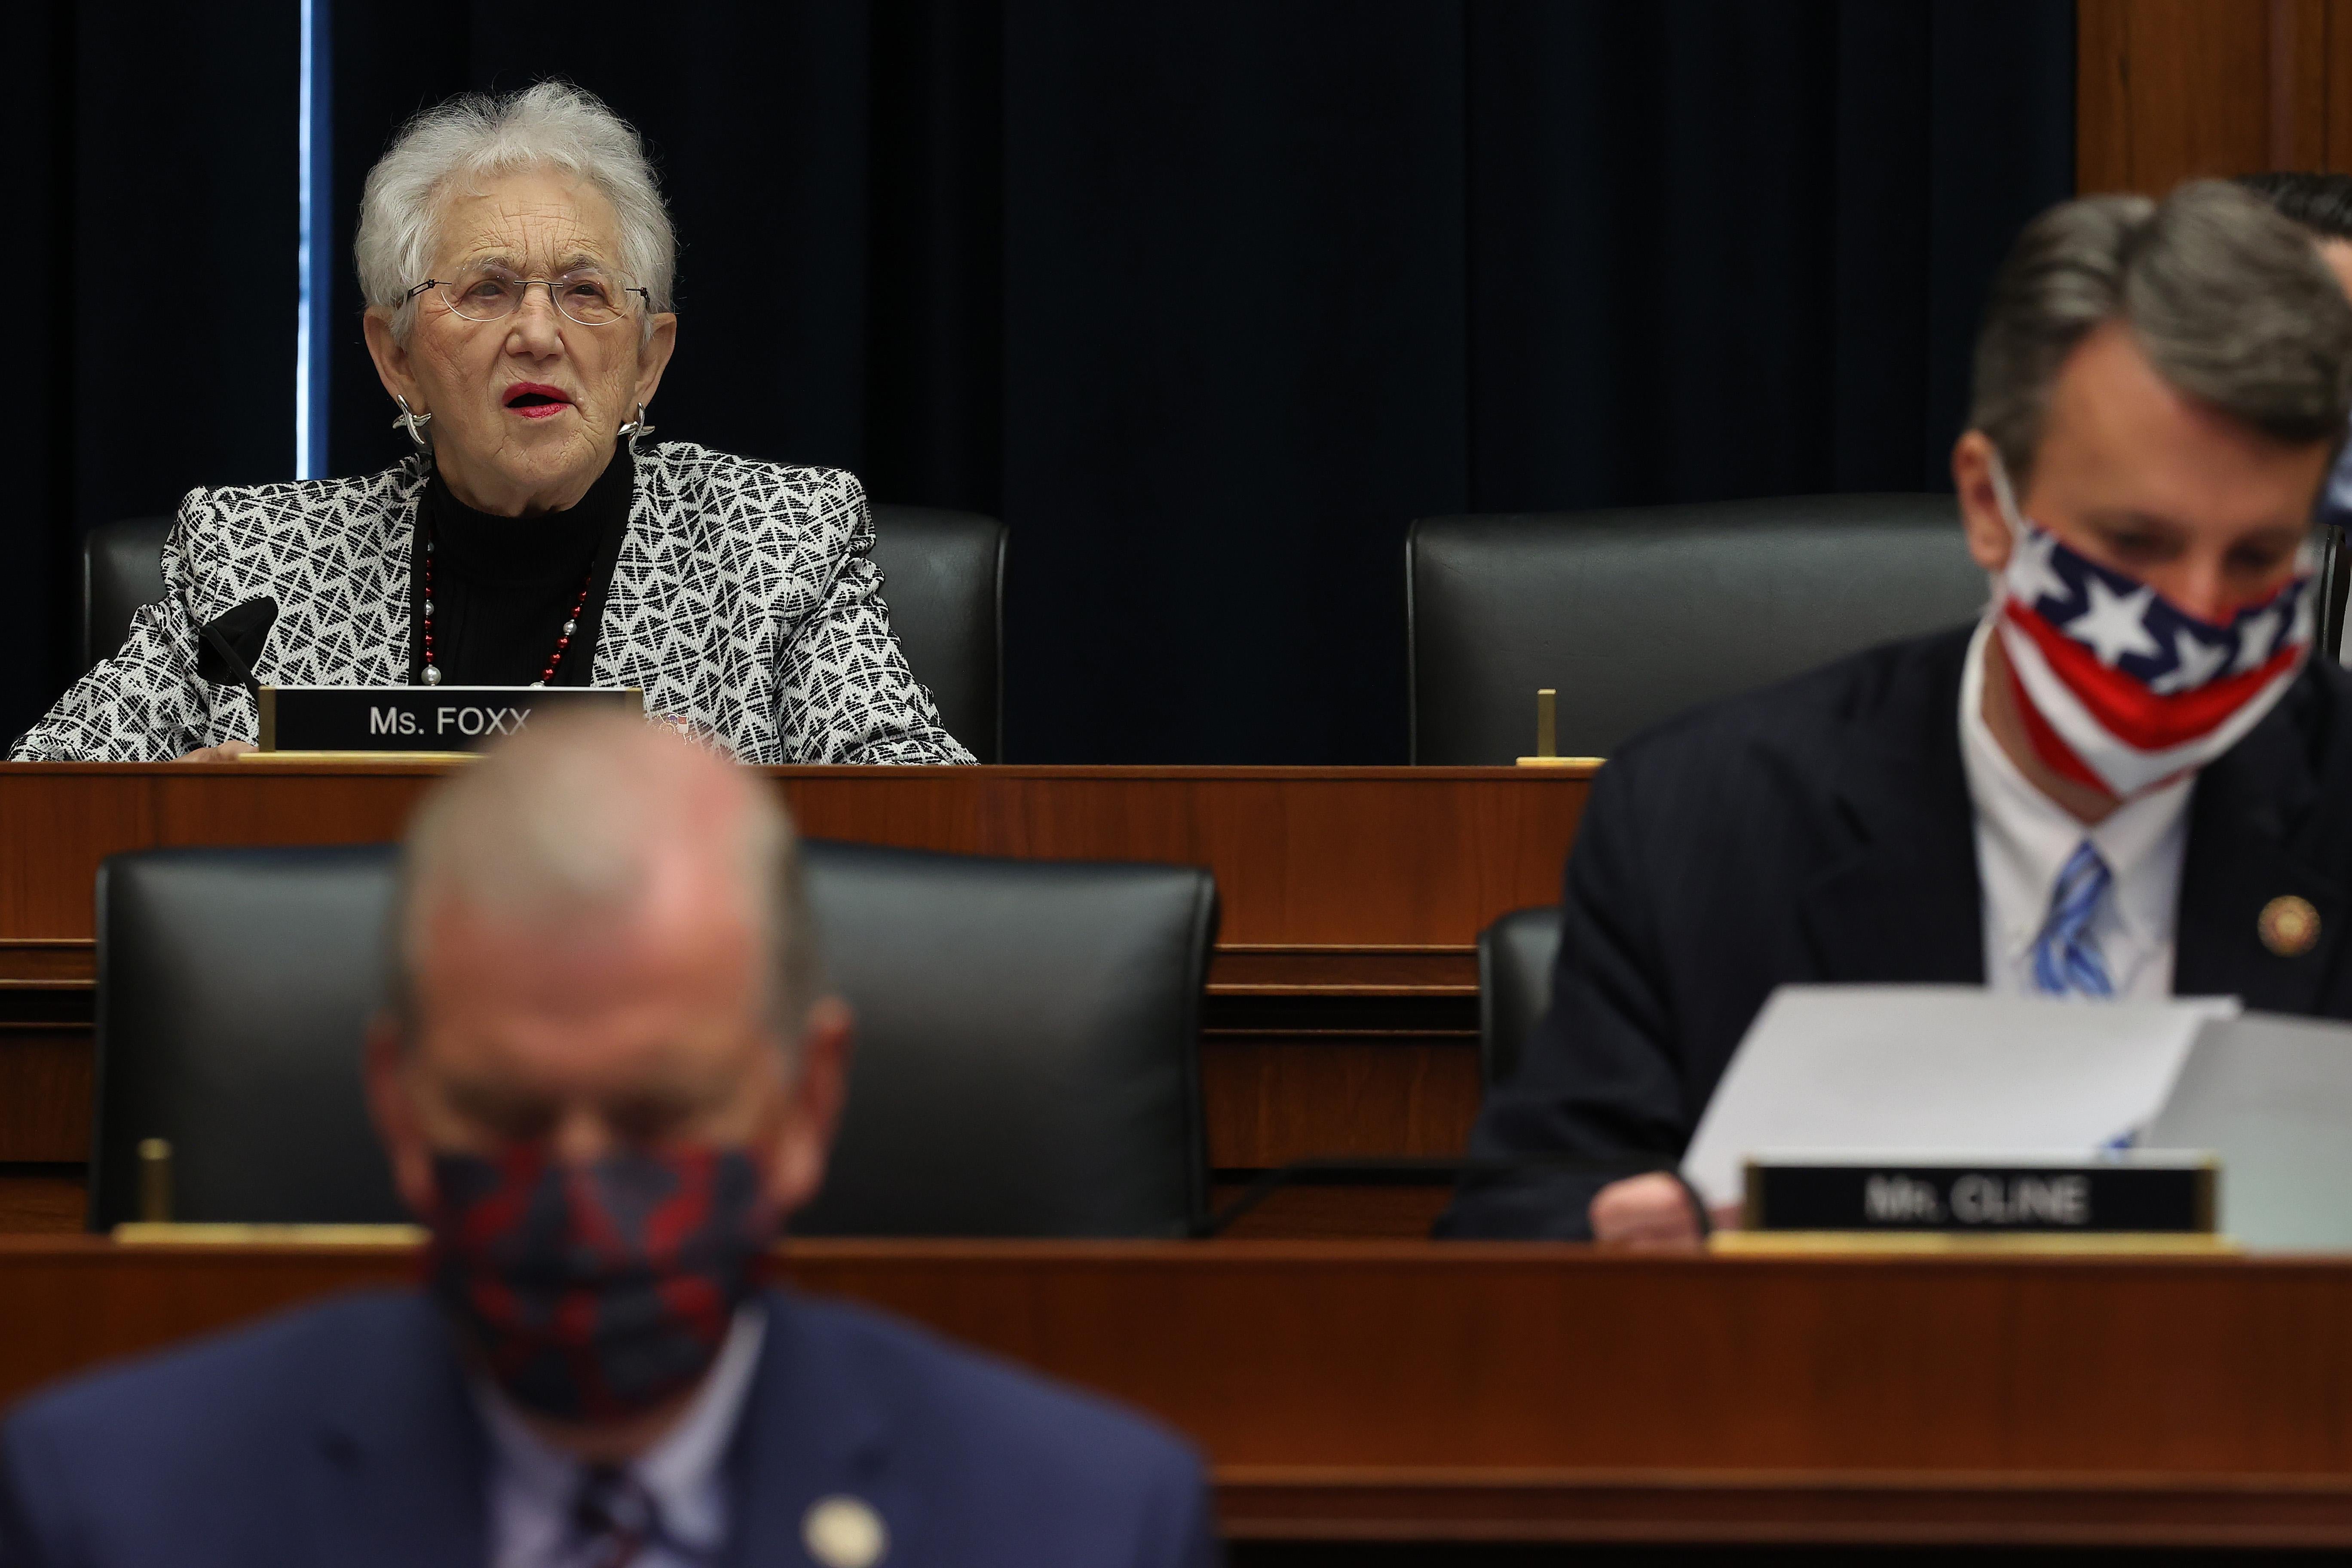 Three representatives seated in a hearing room, two wearing masks while Foxx does not